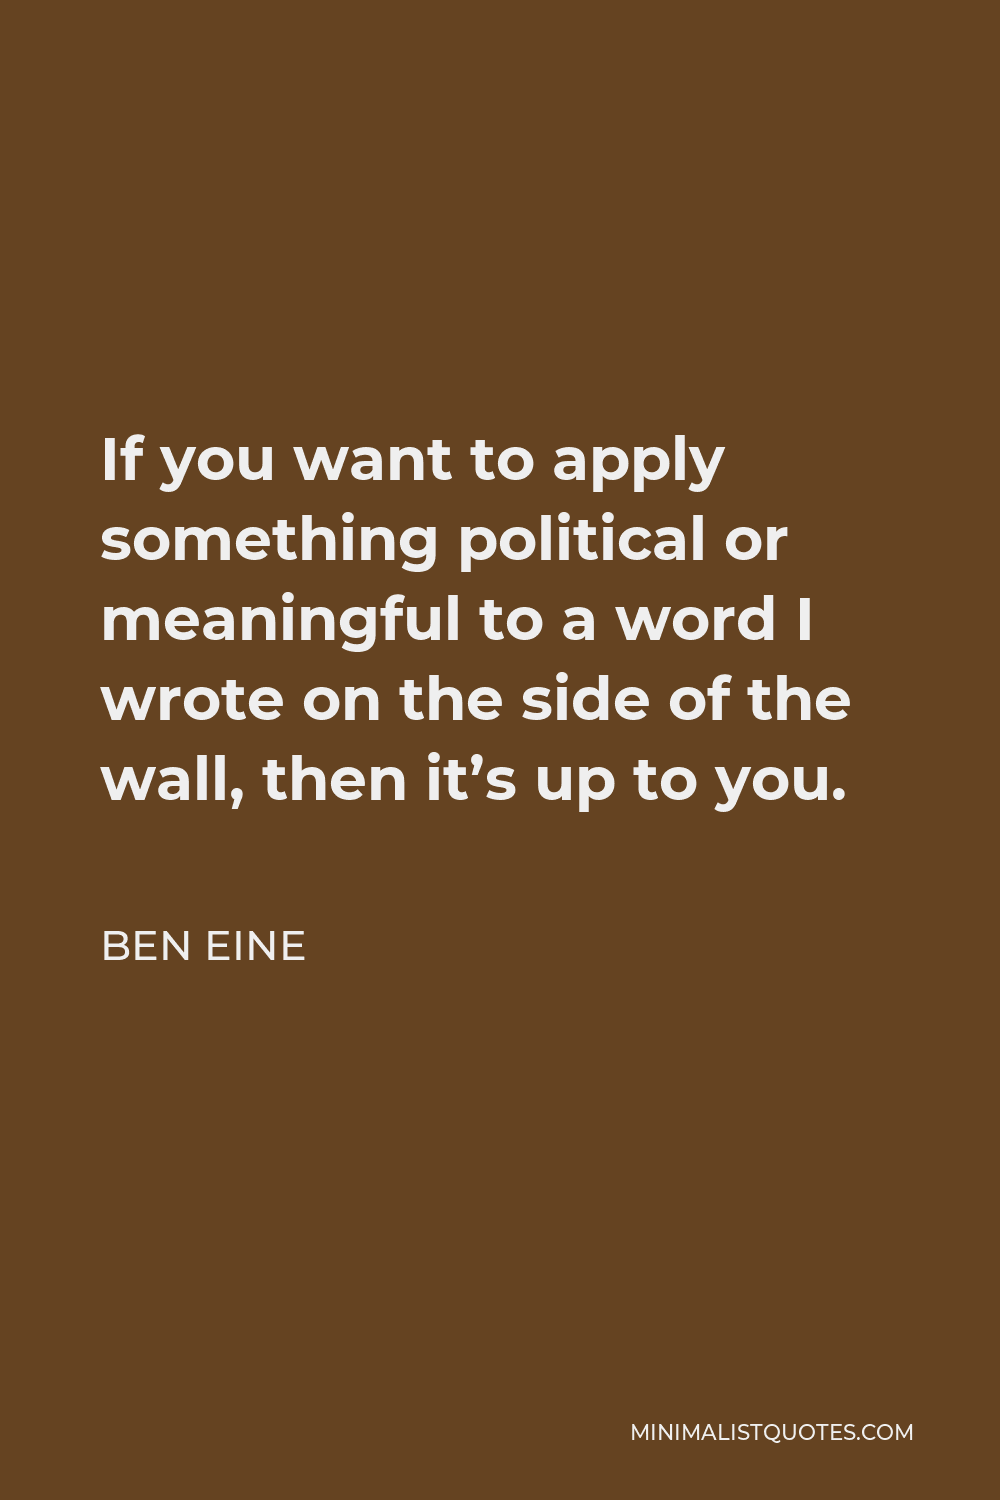 Ben Eine Quote - If you want to apply something political or meaningful to a word I wrote on the side of the wall, then it’s up to you.